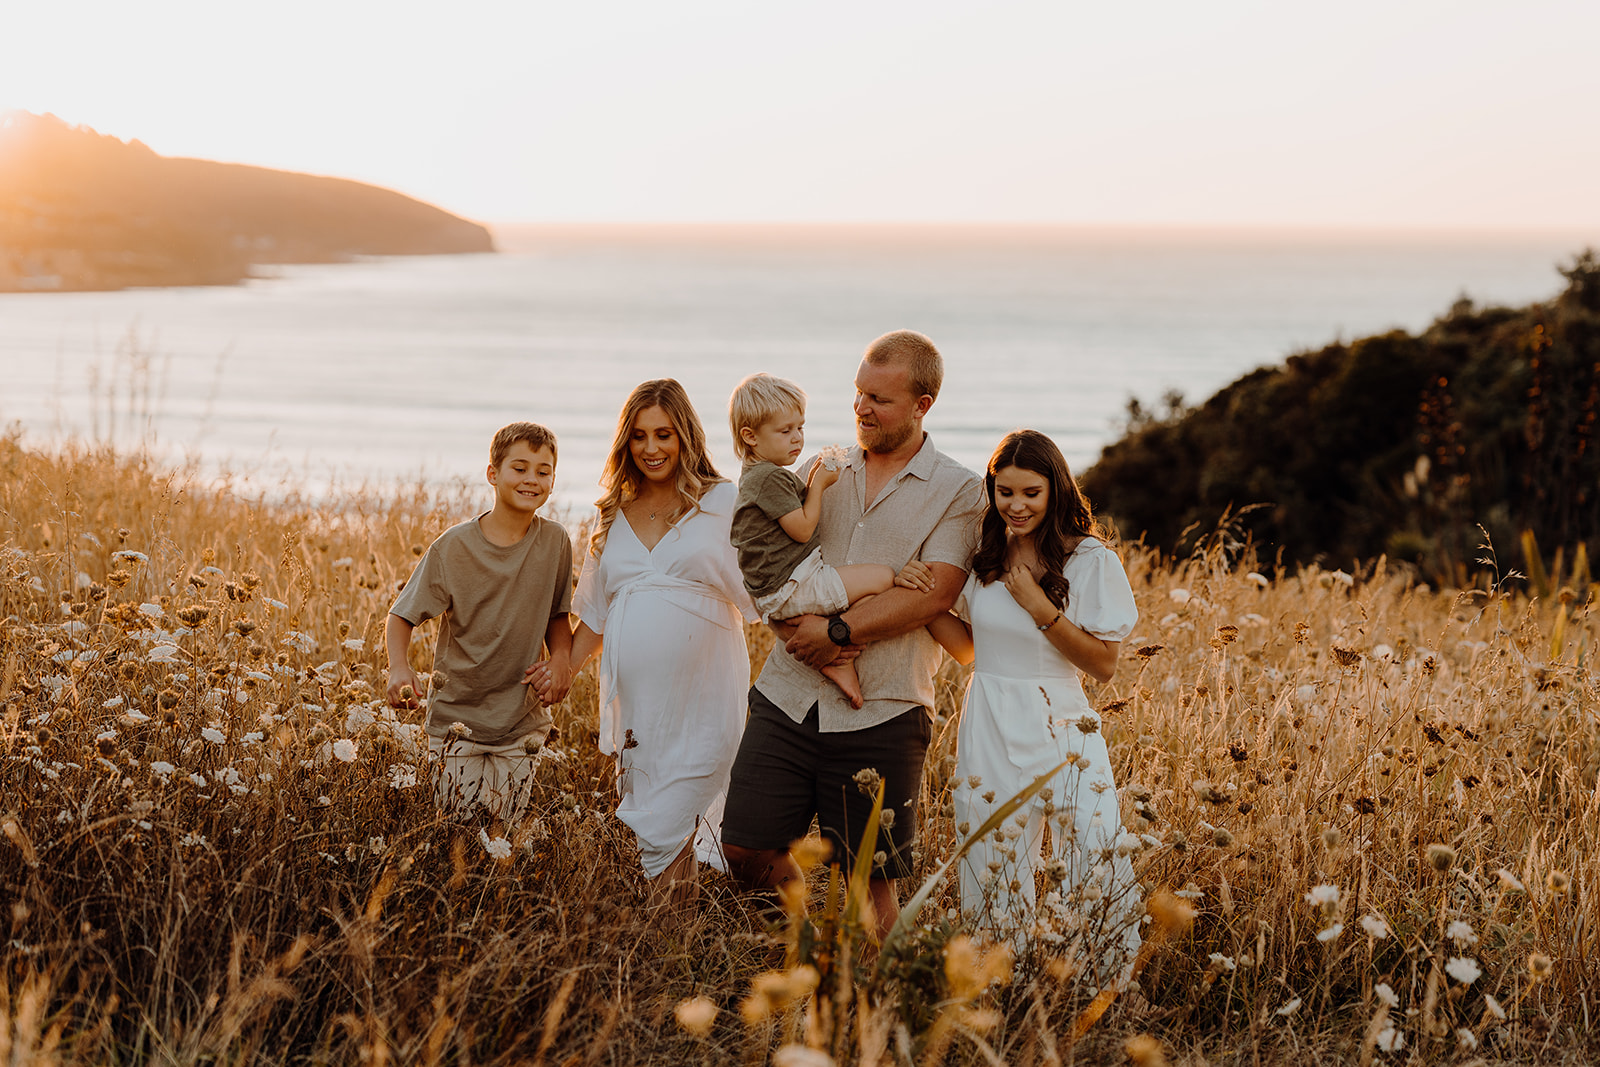 A portrait of a family walking through the long grass in summer during sunset with the Raglan coast in the background photographed by Hamilton Family Photographer Haley Adele Photography